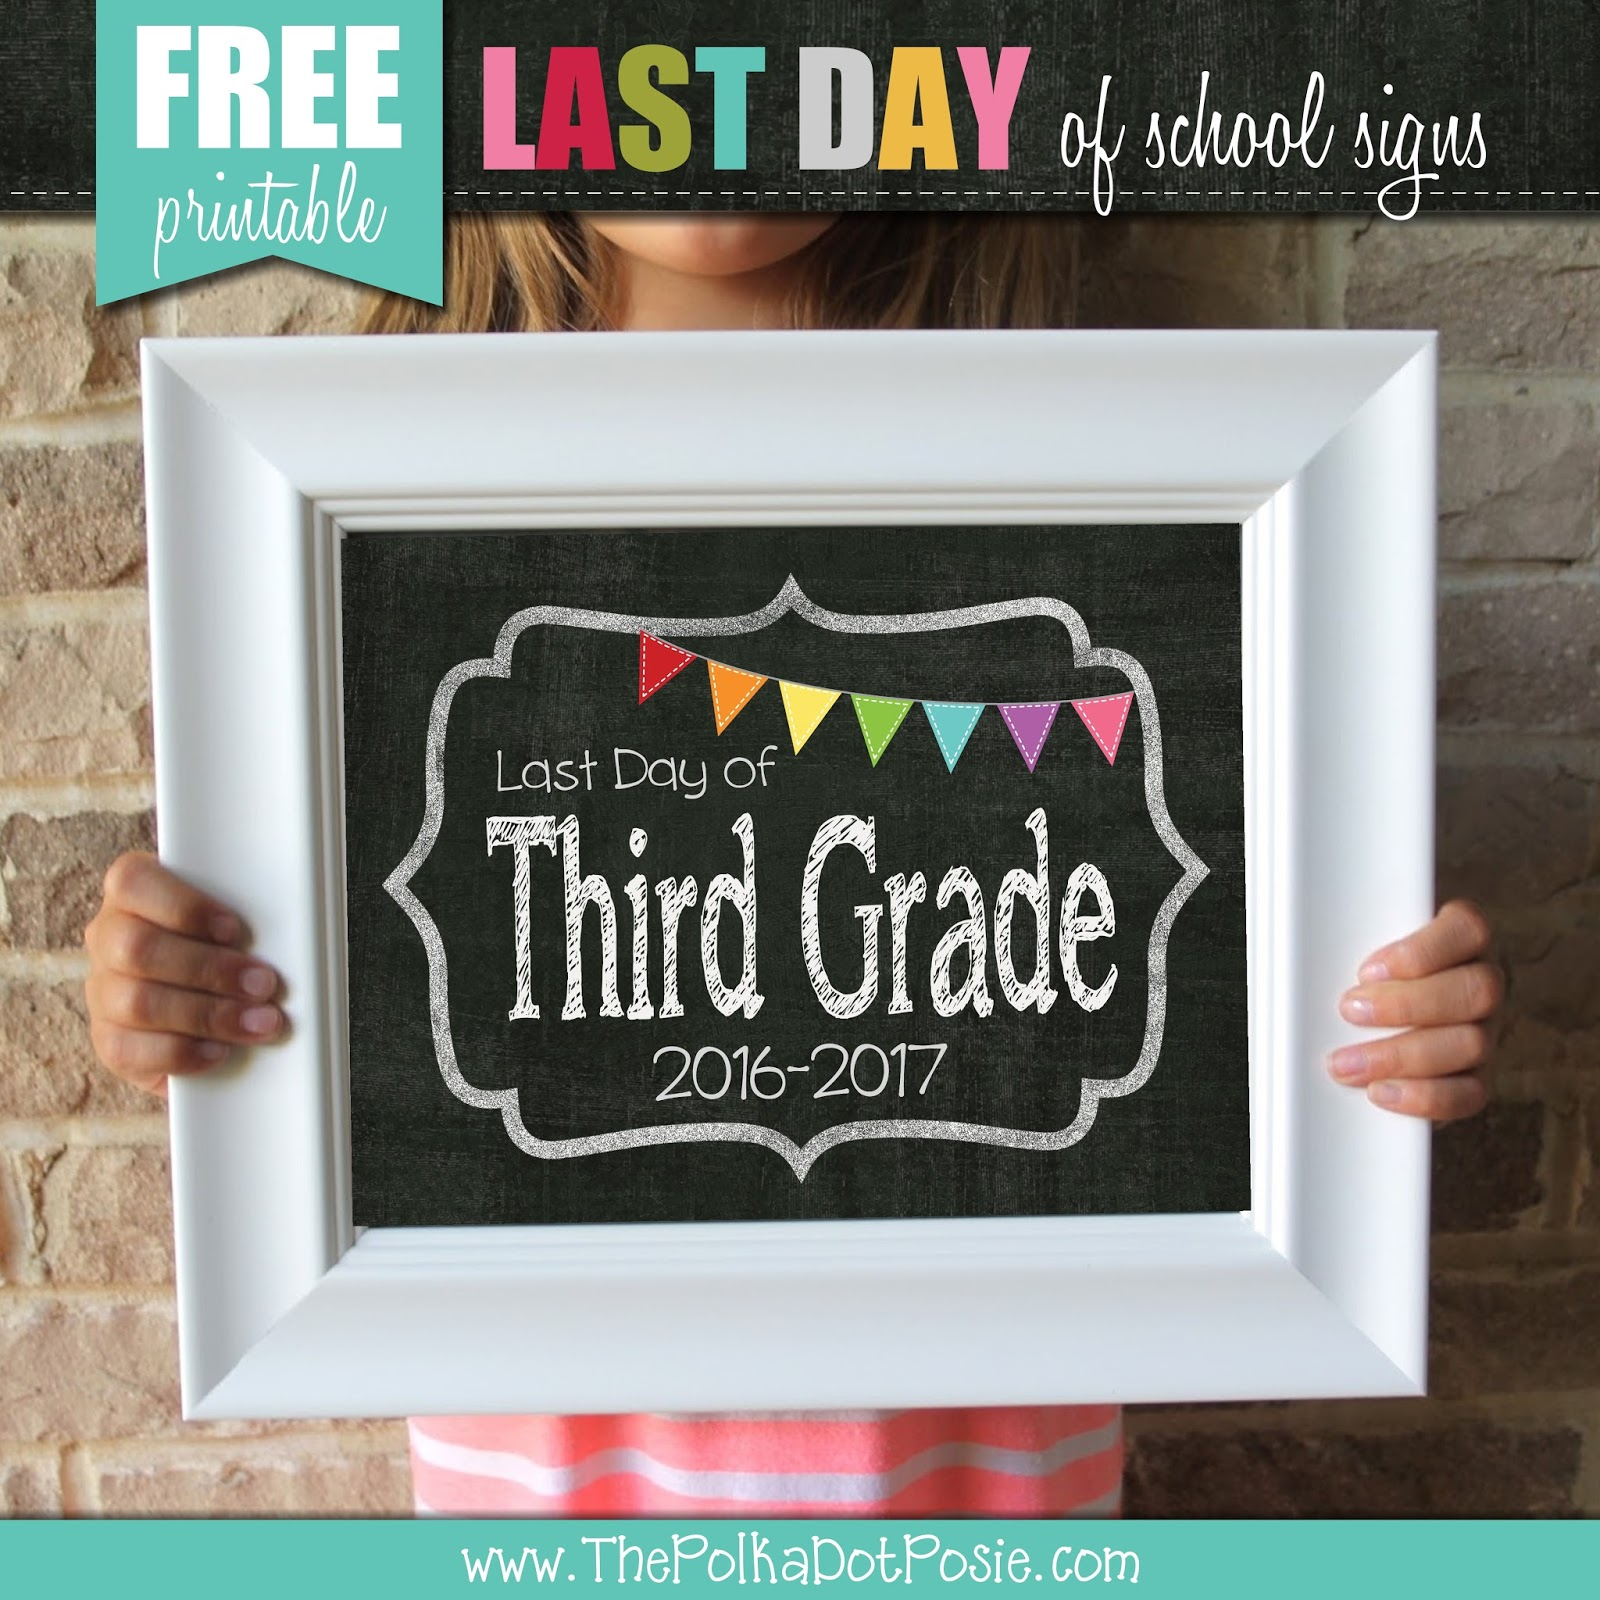 2017 First Day Of School Printables Free - 10.16.hus-Noorderpad.de • - First Day Of School Printable Free